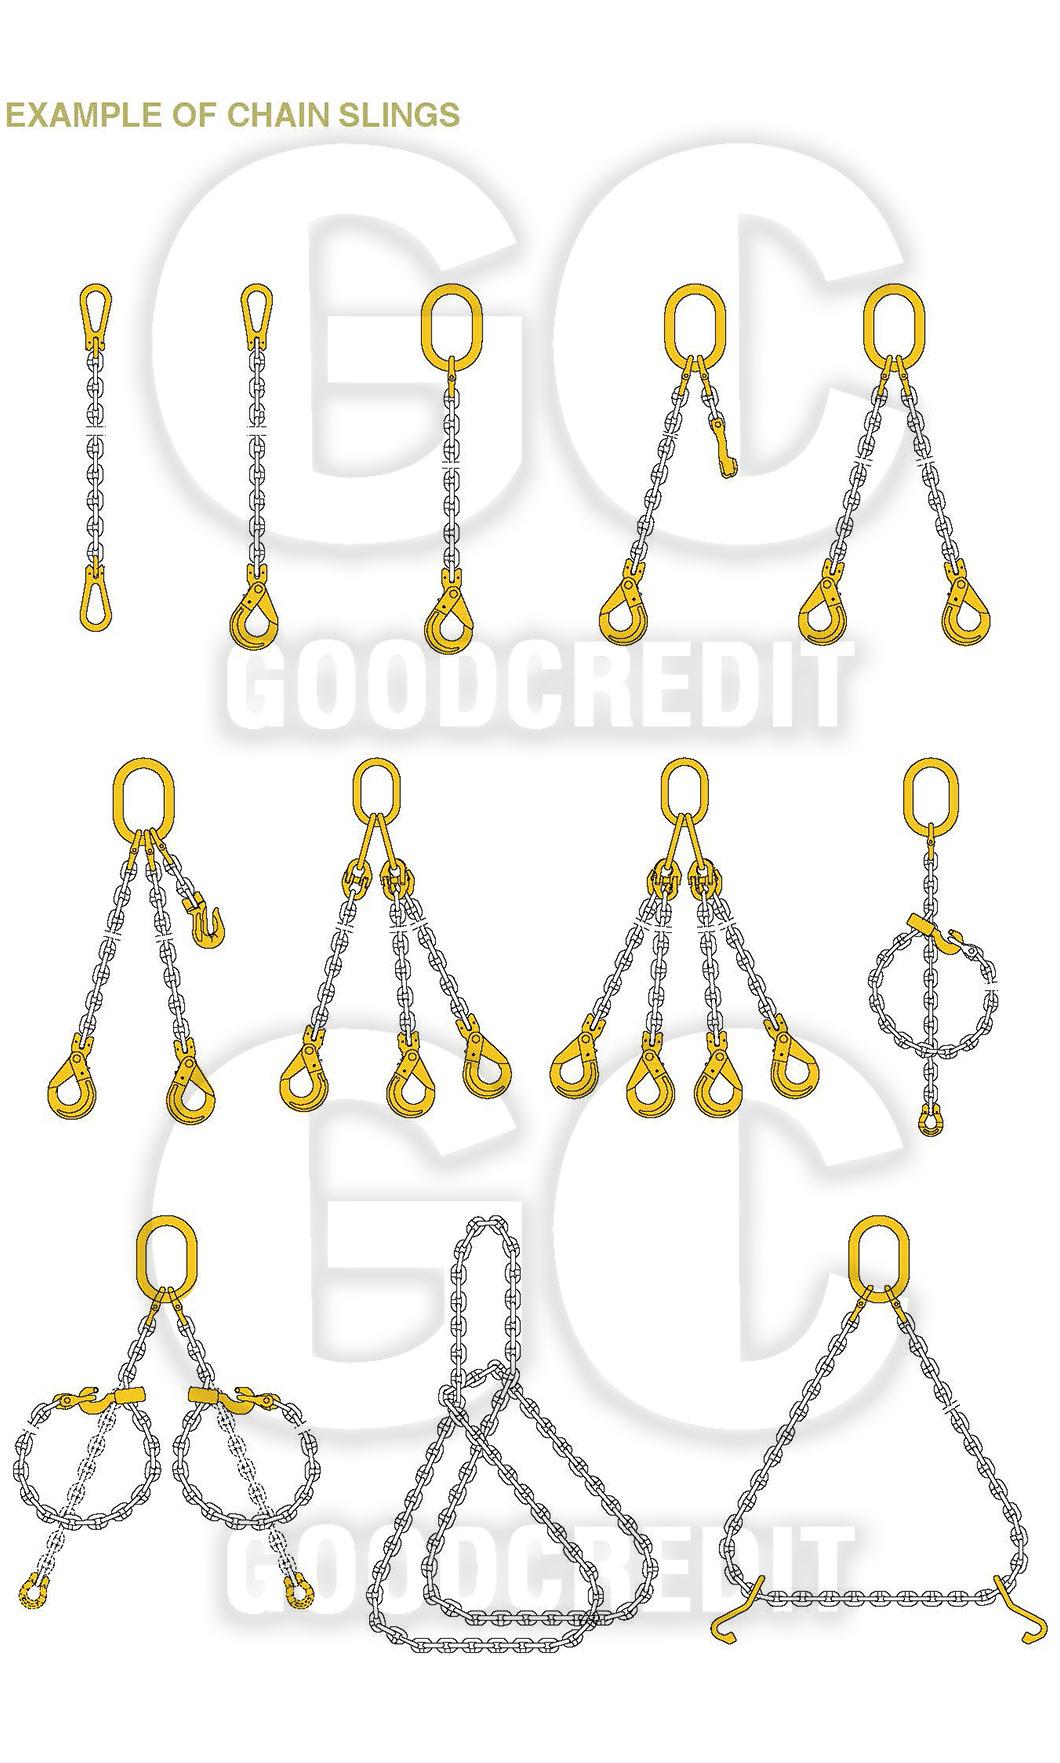 English Standard High Quality Welded Short Link Chain